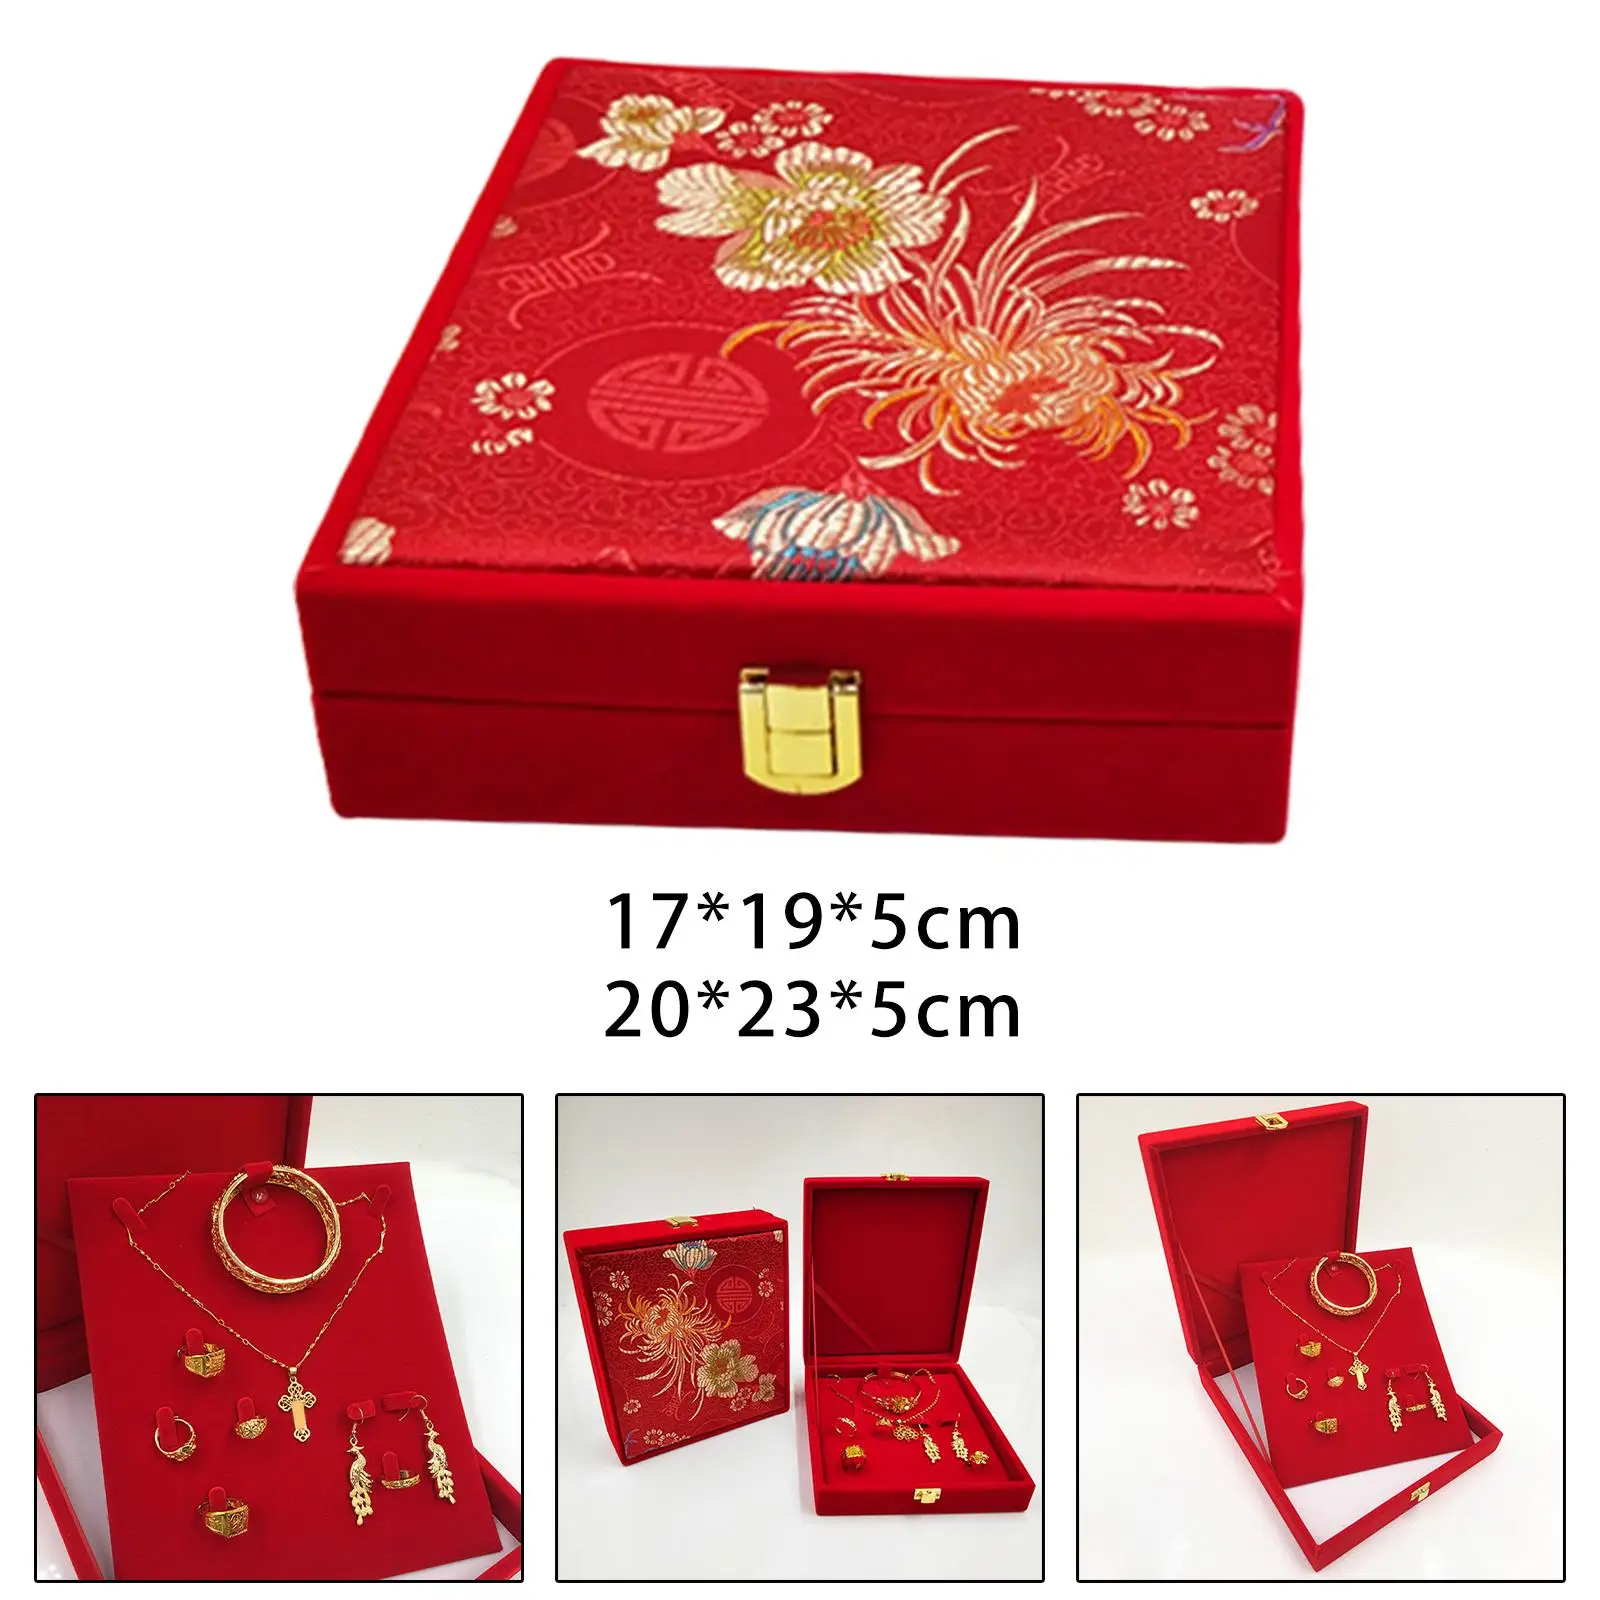 Multifunctional Jewelry Display Box Chinese Style Red Velvet Showcase Container Packaging Case Organizer for Anniversary Day